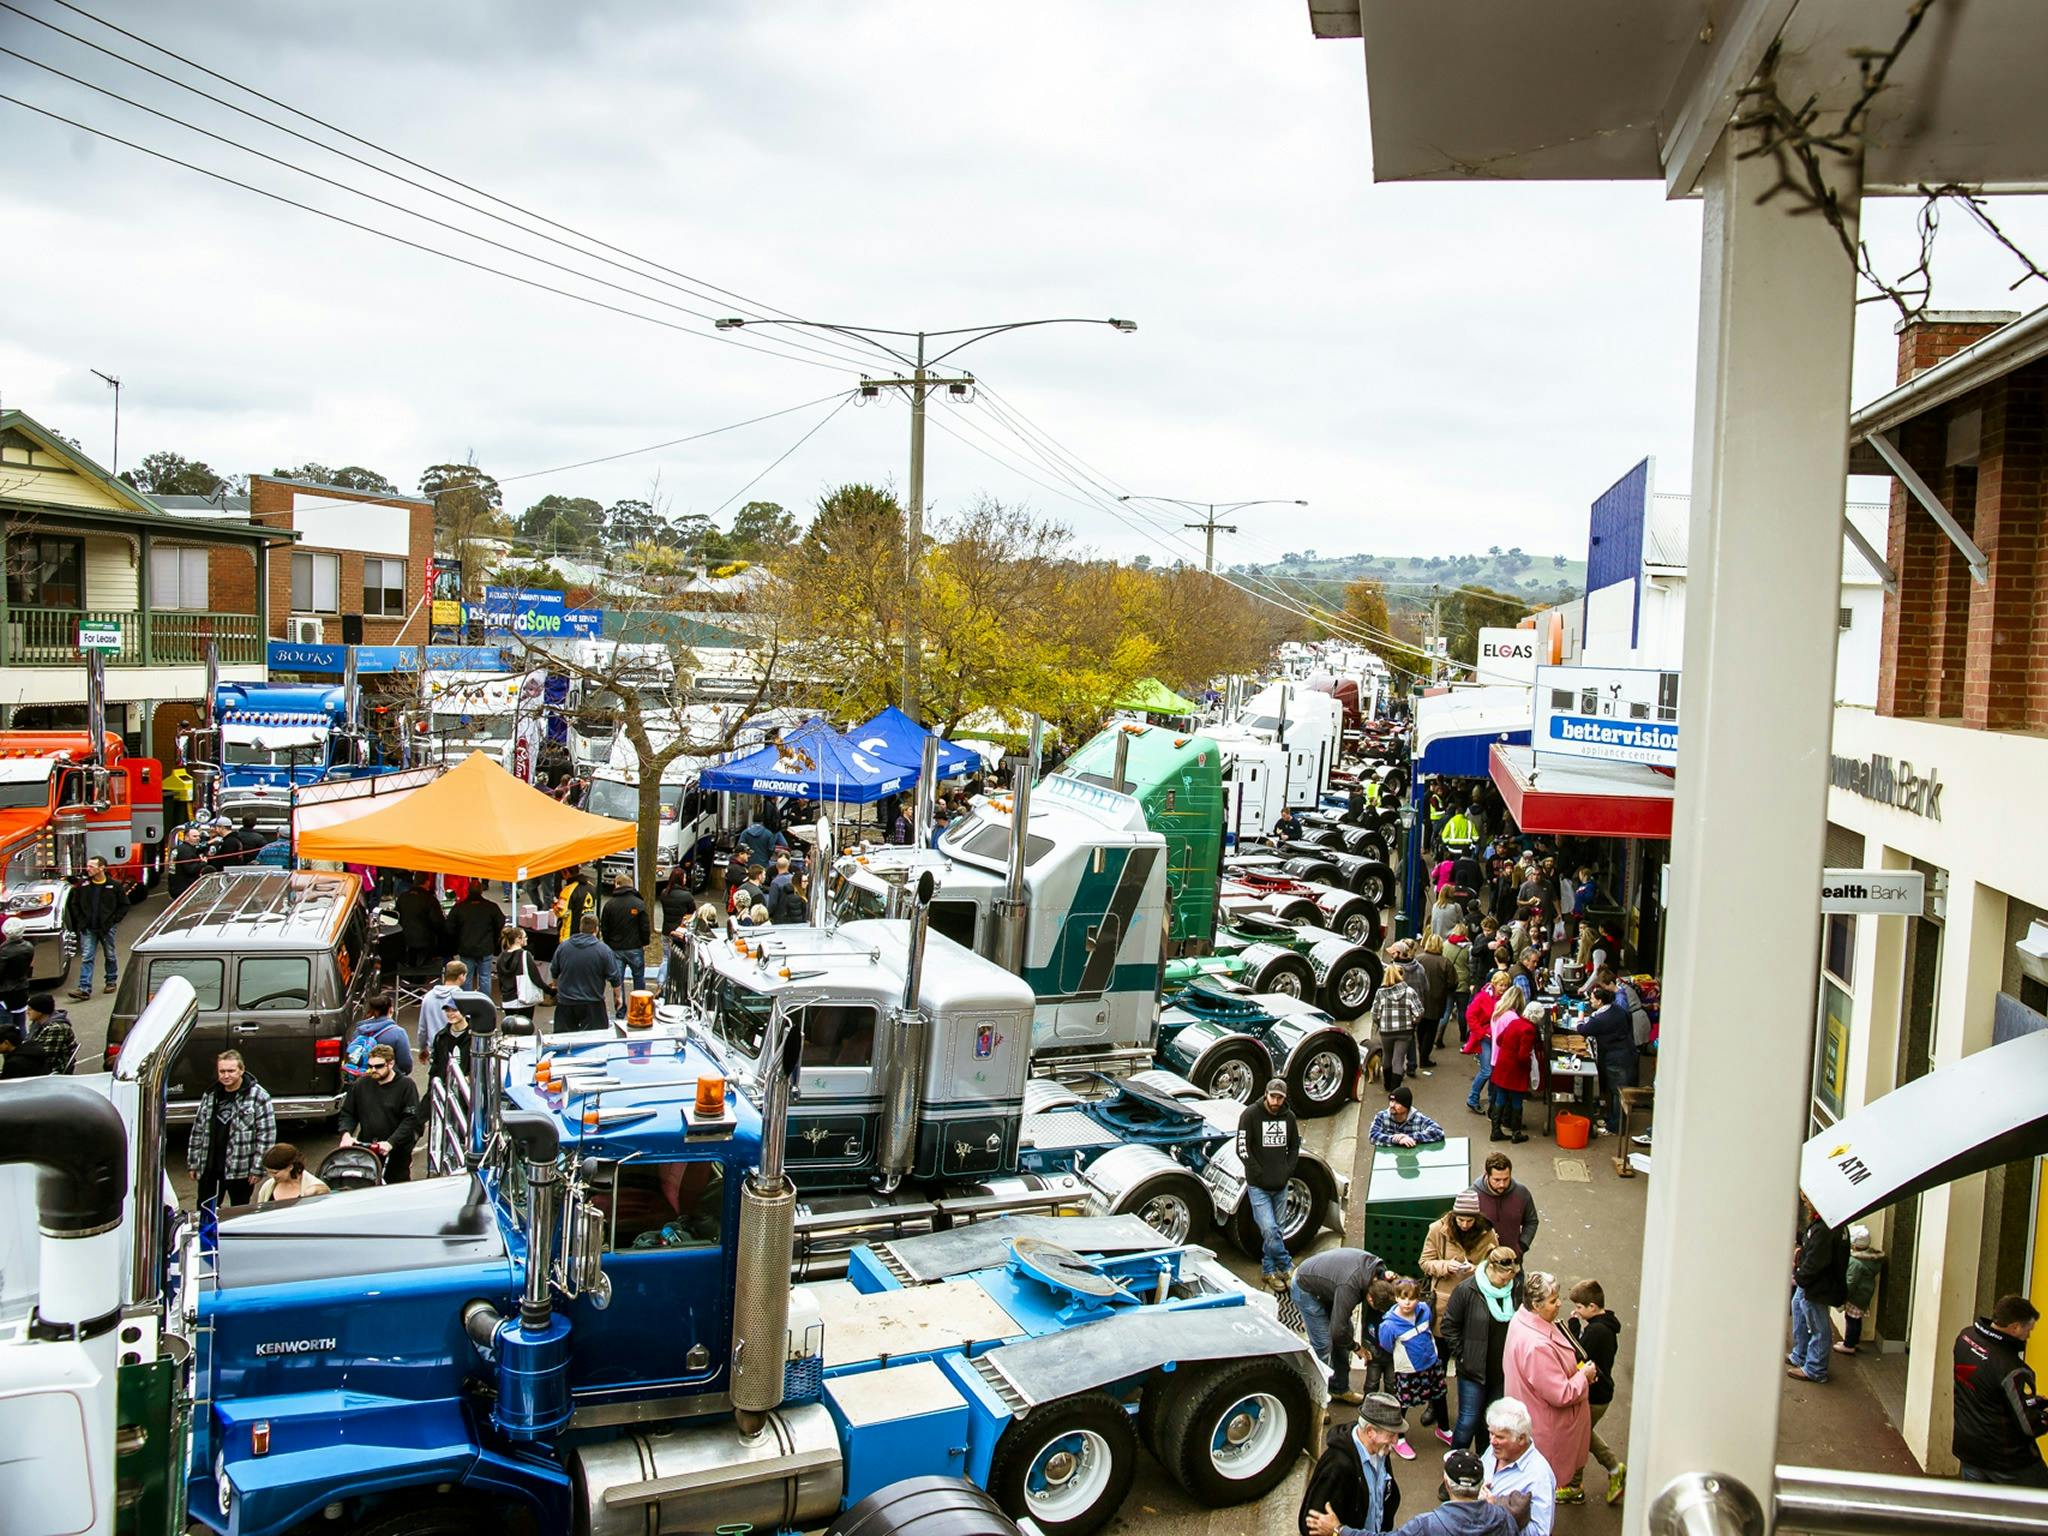 Photo of trucks parked closely together in the main street, taken from a shop balcony